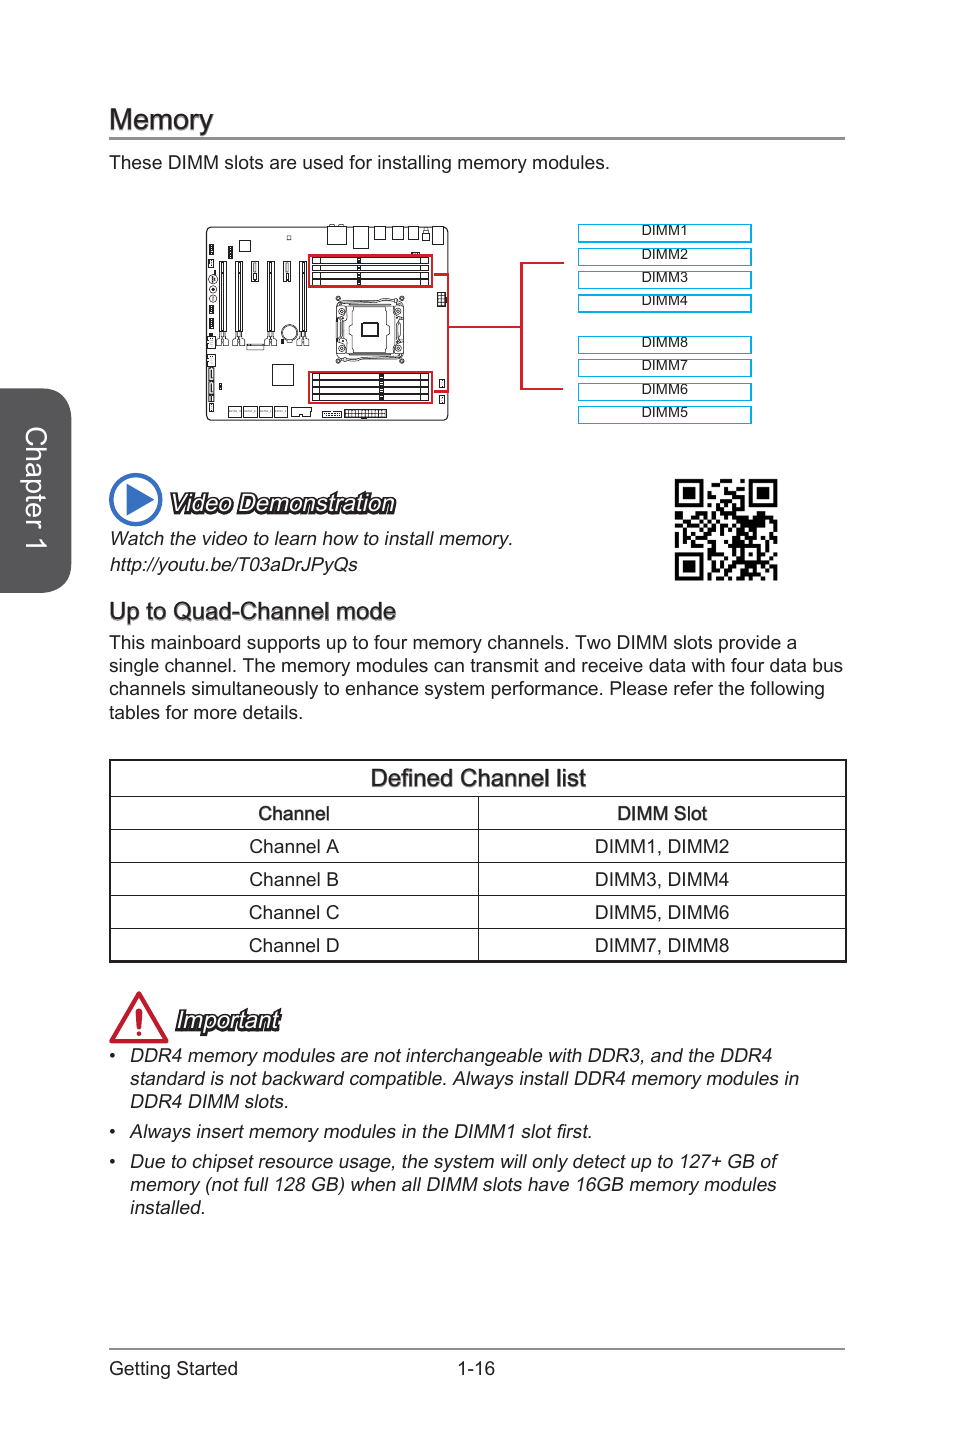 Memory, Up to quad-channel mode, Defined channel list | MSI X99S SLI PLUS  Manual User Manual | Page 30 / 108